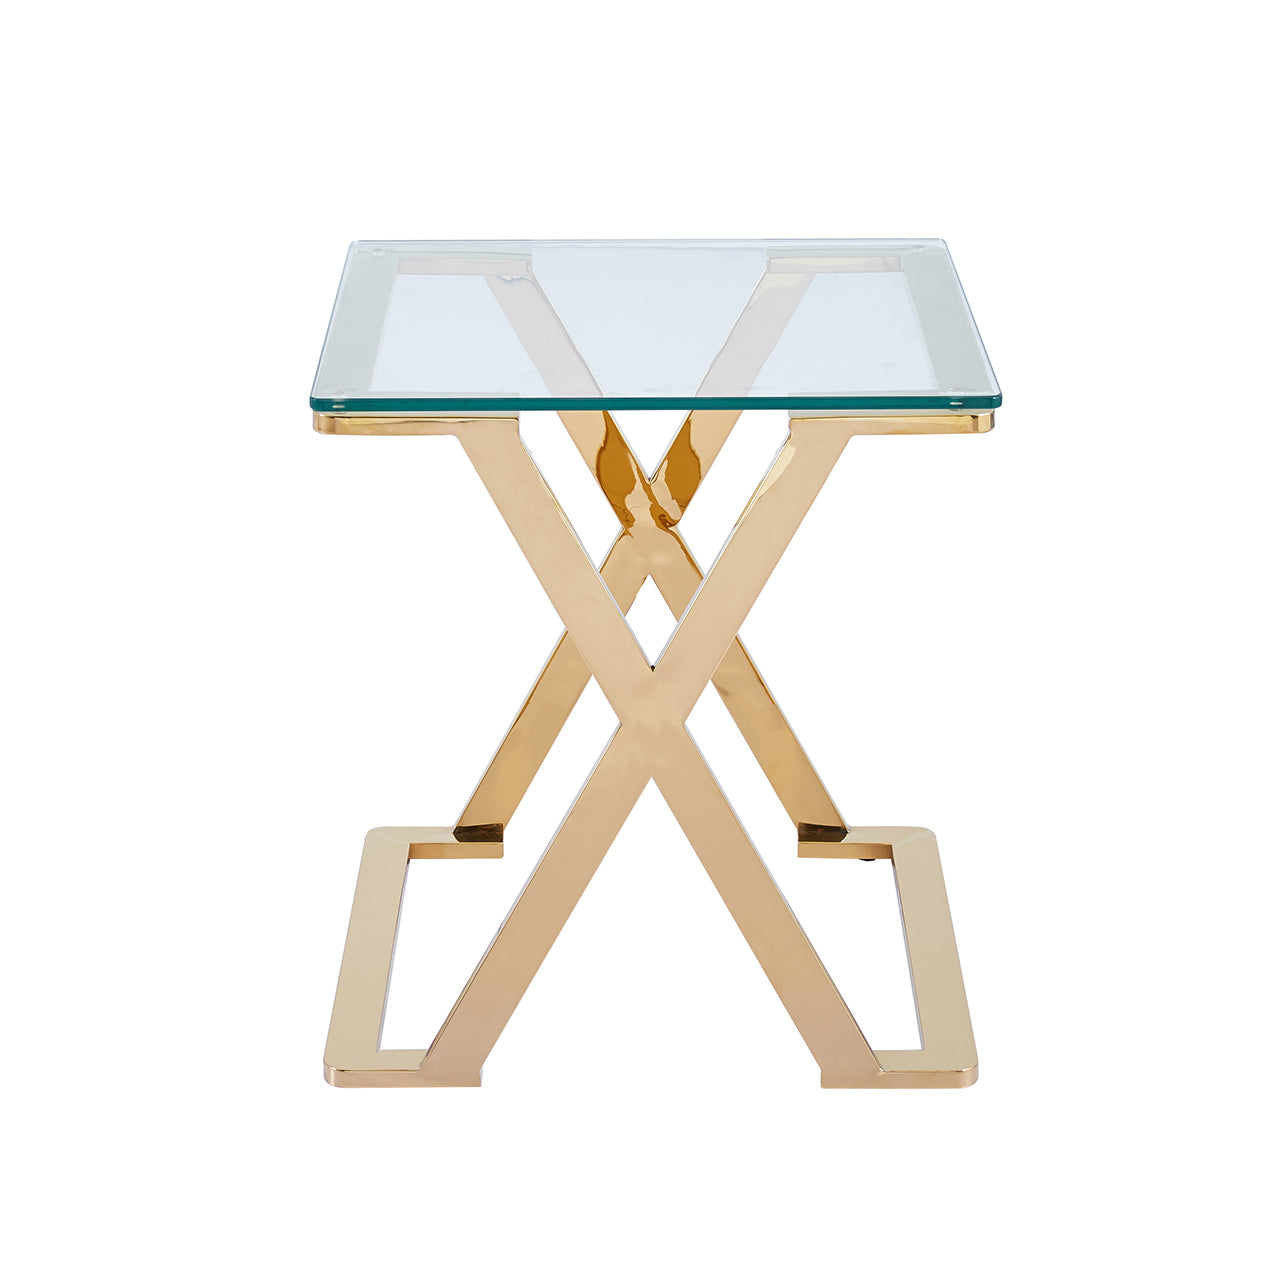 Gold stainless steel end table